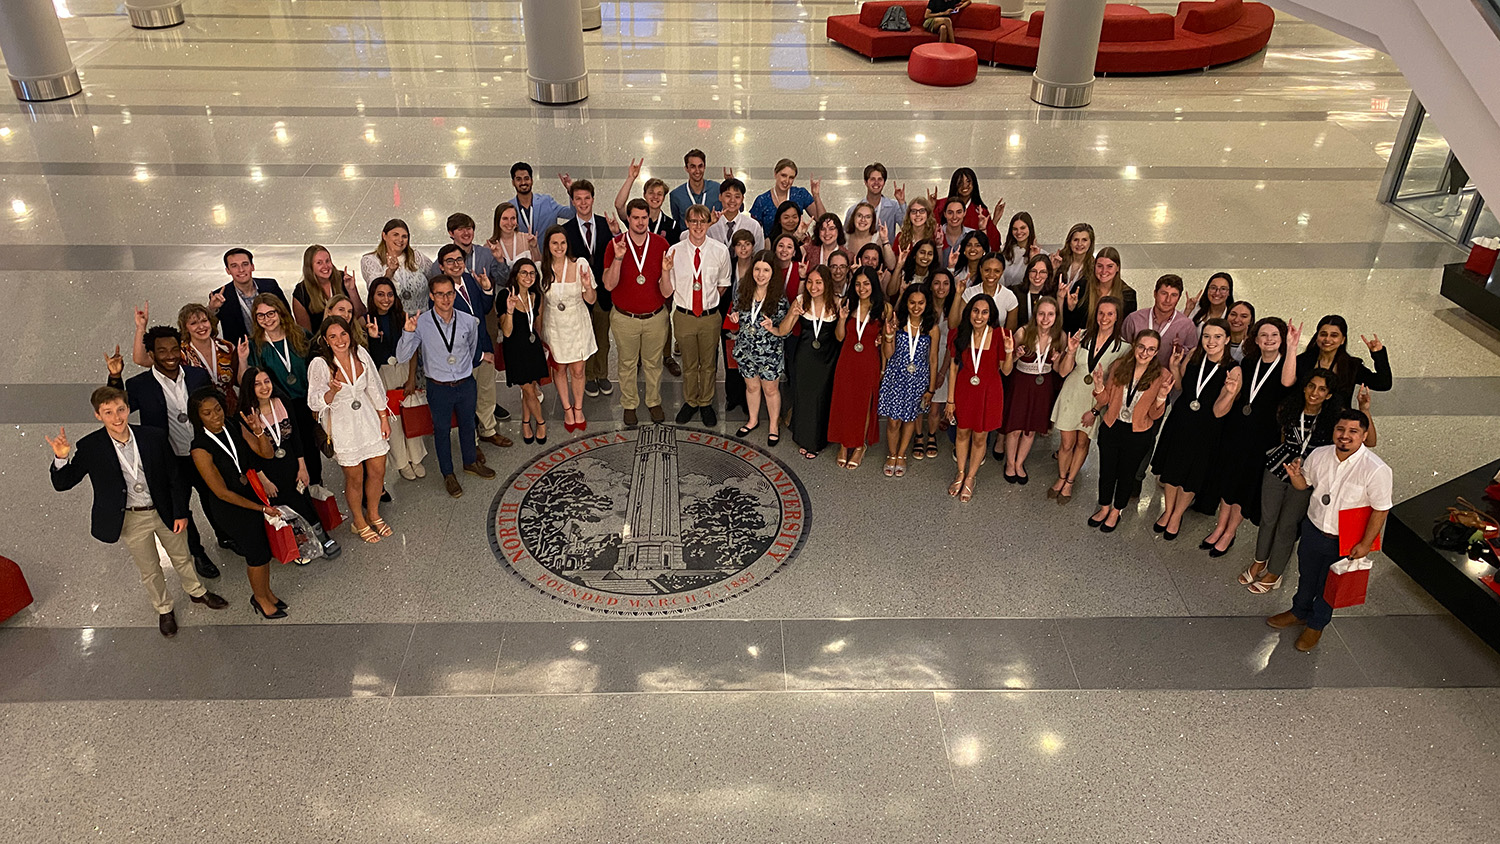 University Honors Program graduating seniors gathered around the seal on the night of their Senior Recognition Ceremony for one final group picture together.